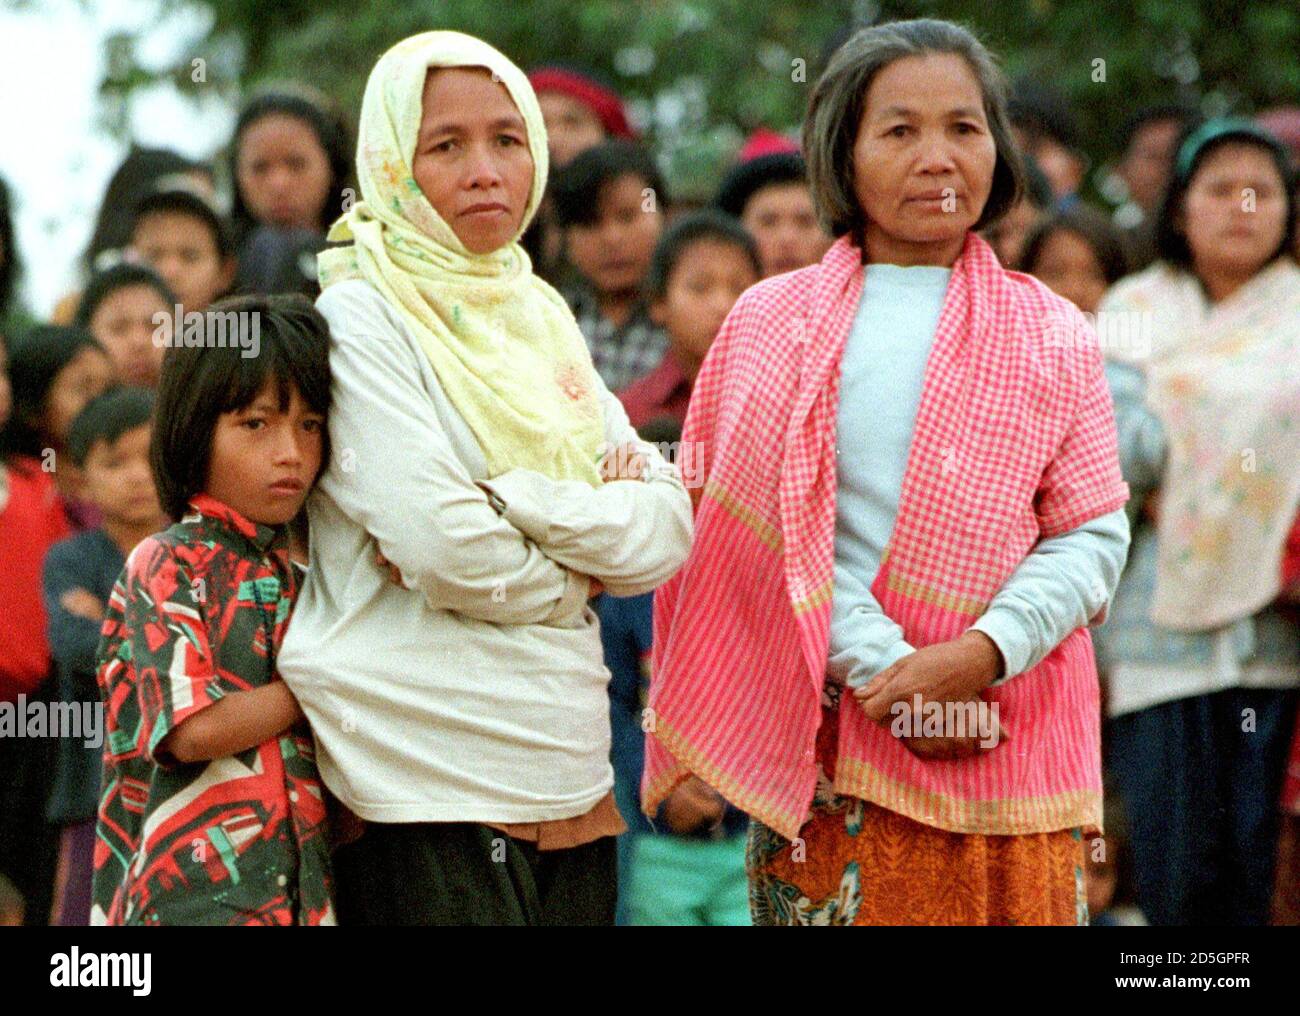 Mea Son (R), the widow of late notorious Khmer Rouge leader Pol Pot, stands  next to an unidentified relative and her daughter (L) as they watch  Cambodian refugees leaving Phu Noi refugee